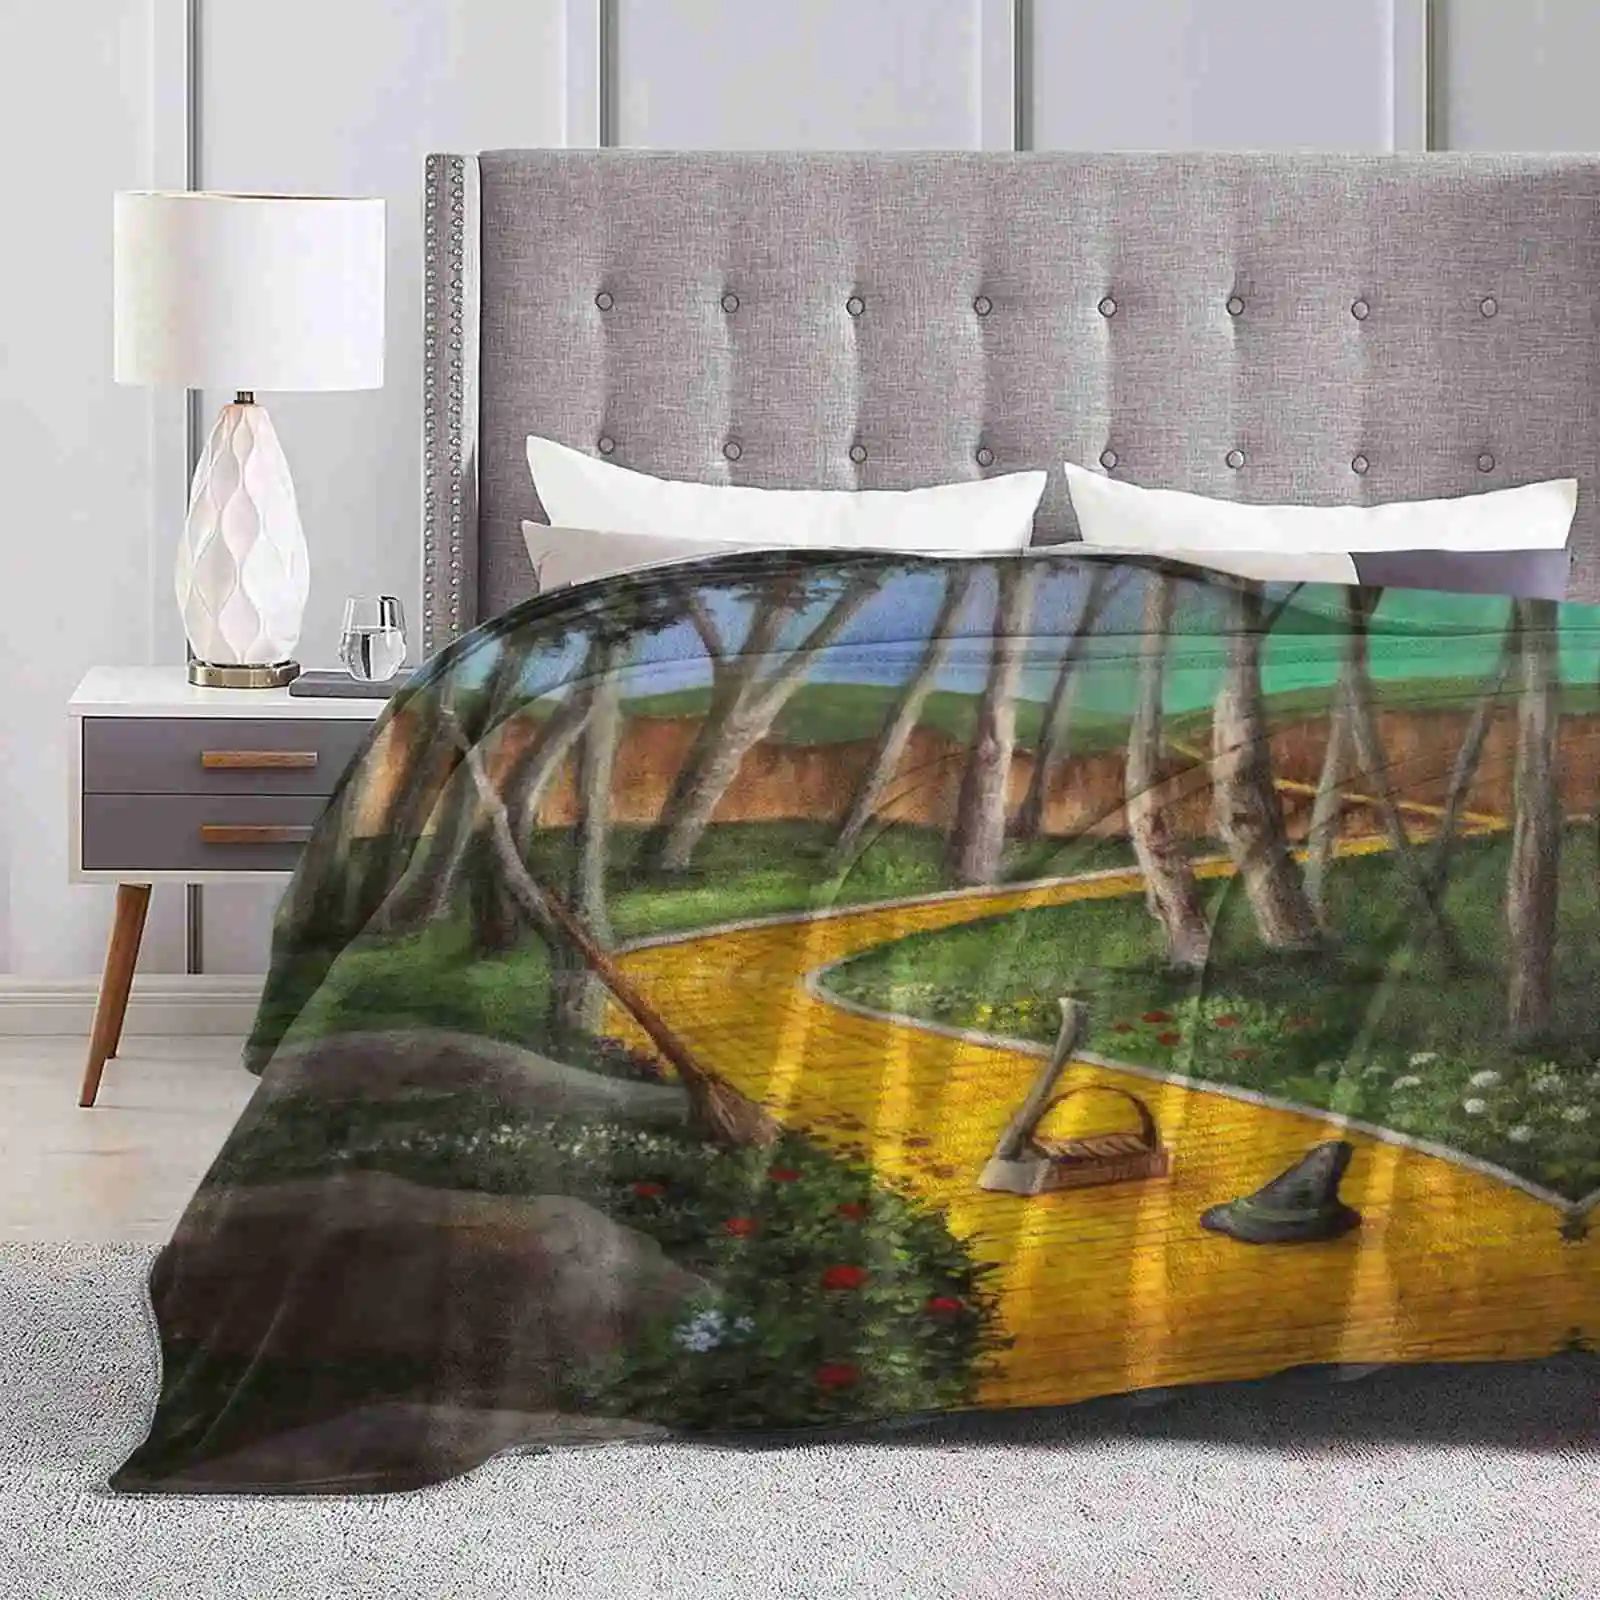 

Memories Of Oz Creative Design Light Thin Soft Flannel Blanket Oz The Great And Powerful Yellow Brick Road Tin Man Scarecrow